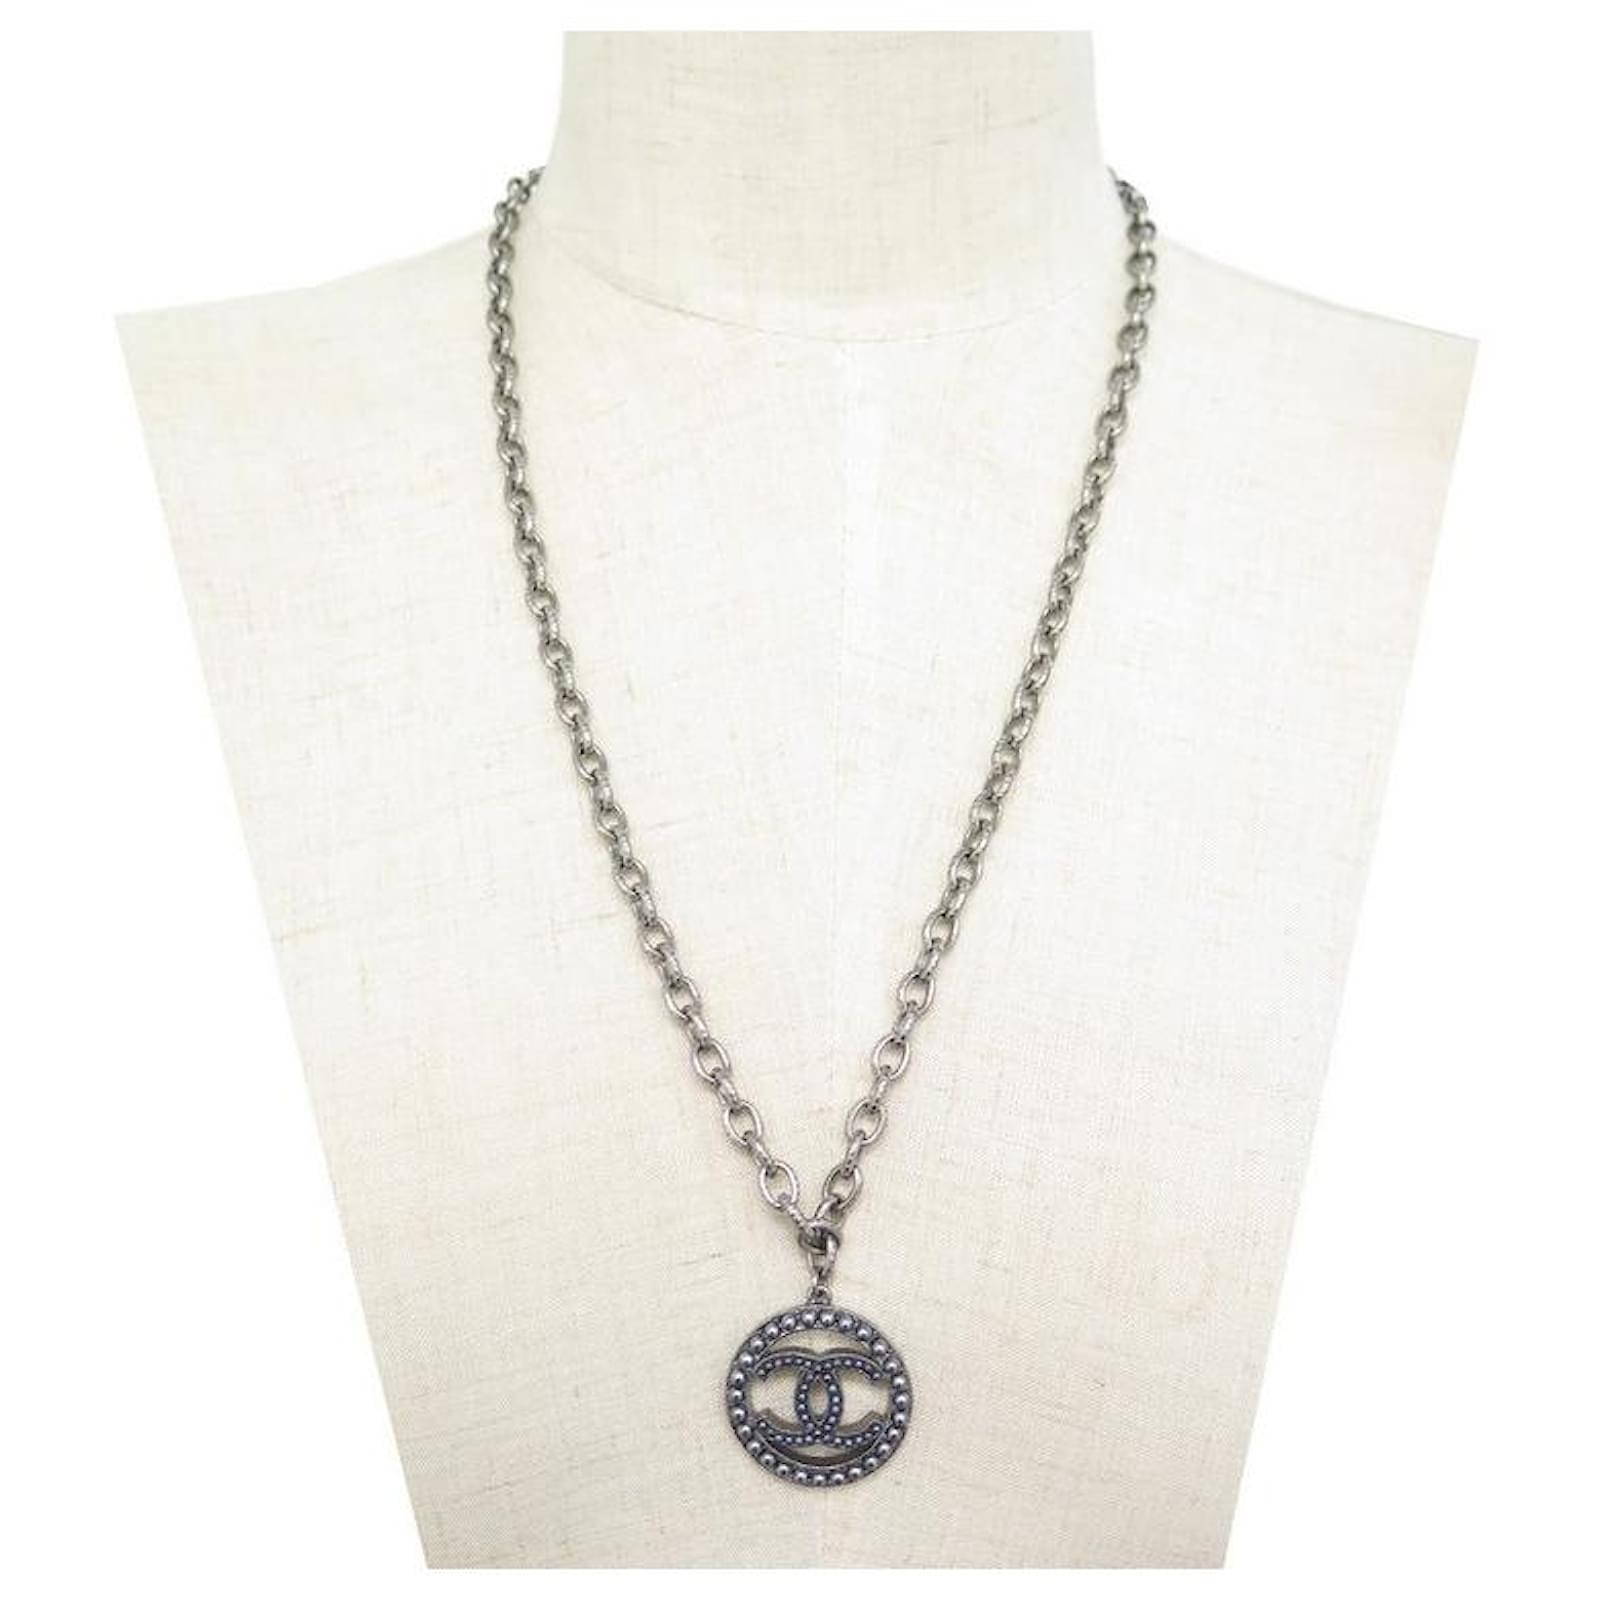 NEW CHANEL LOGO CC NECKLACE 63 CM SILVER METAL & NECKLACE BEADS